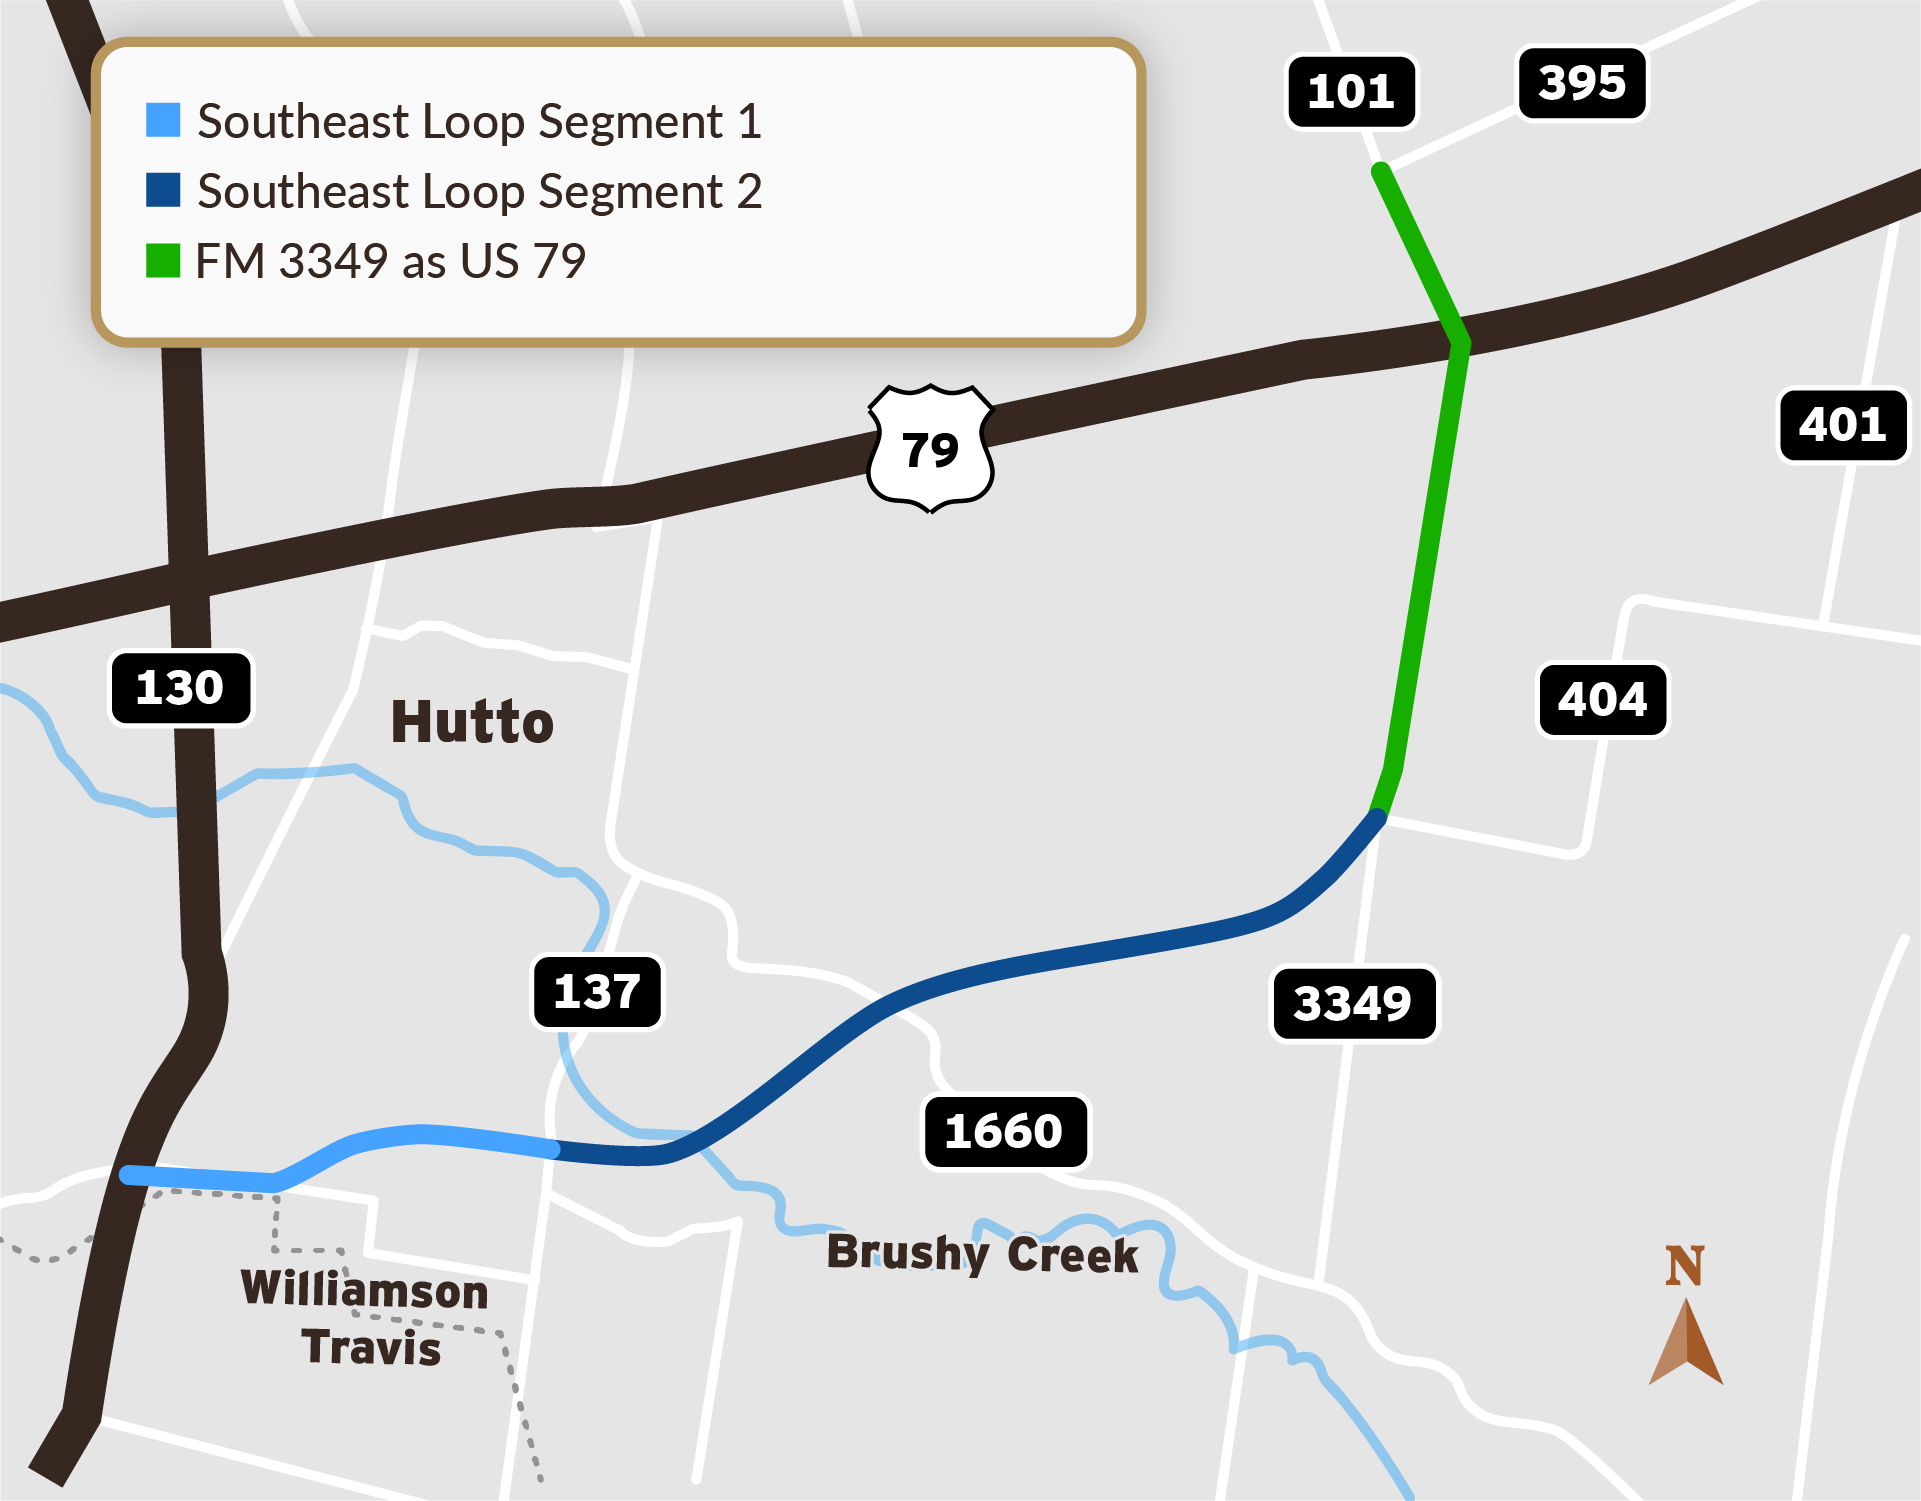 Southeast Loop Road Construction Project Map in Williamson County